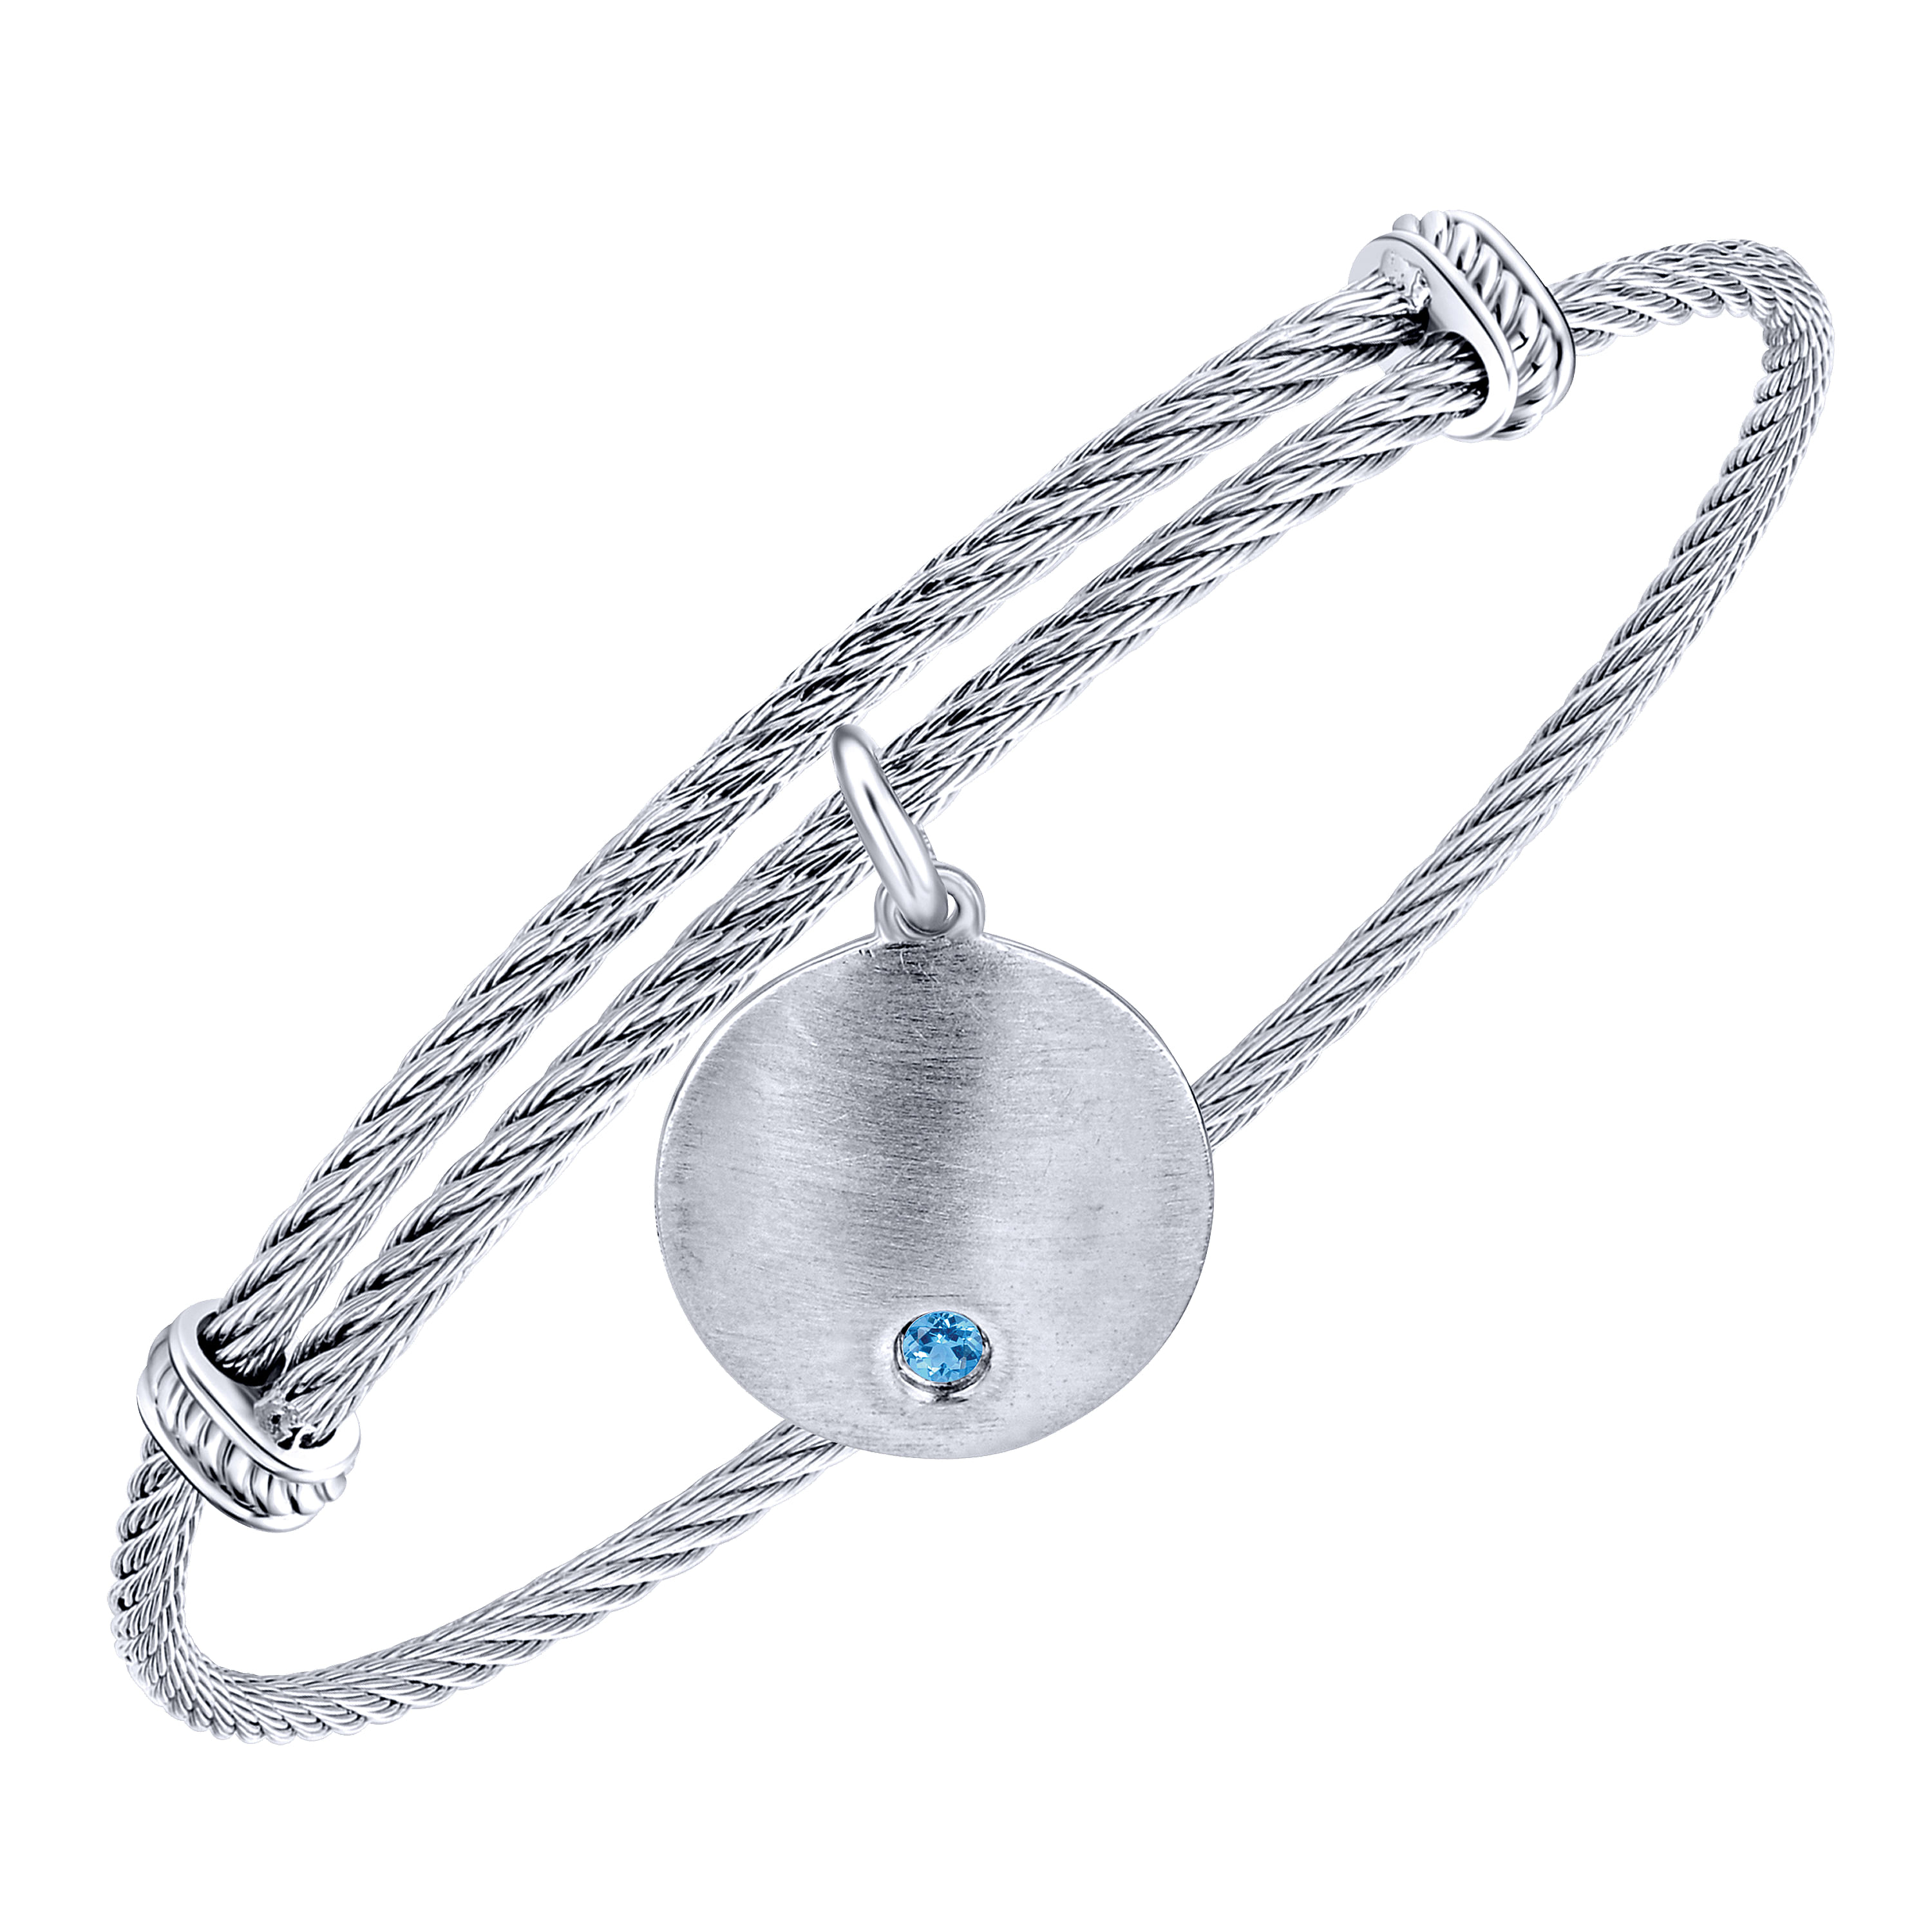 Adjustable Stainless Steel Bangle with Round Sterling Silver Blue Topaz Stone Disc Charm